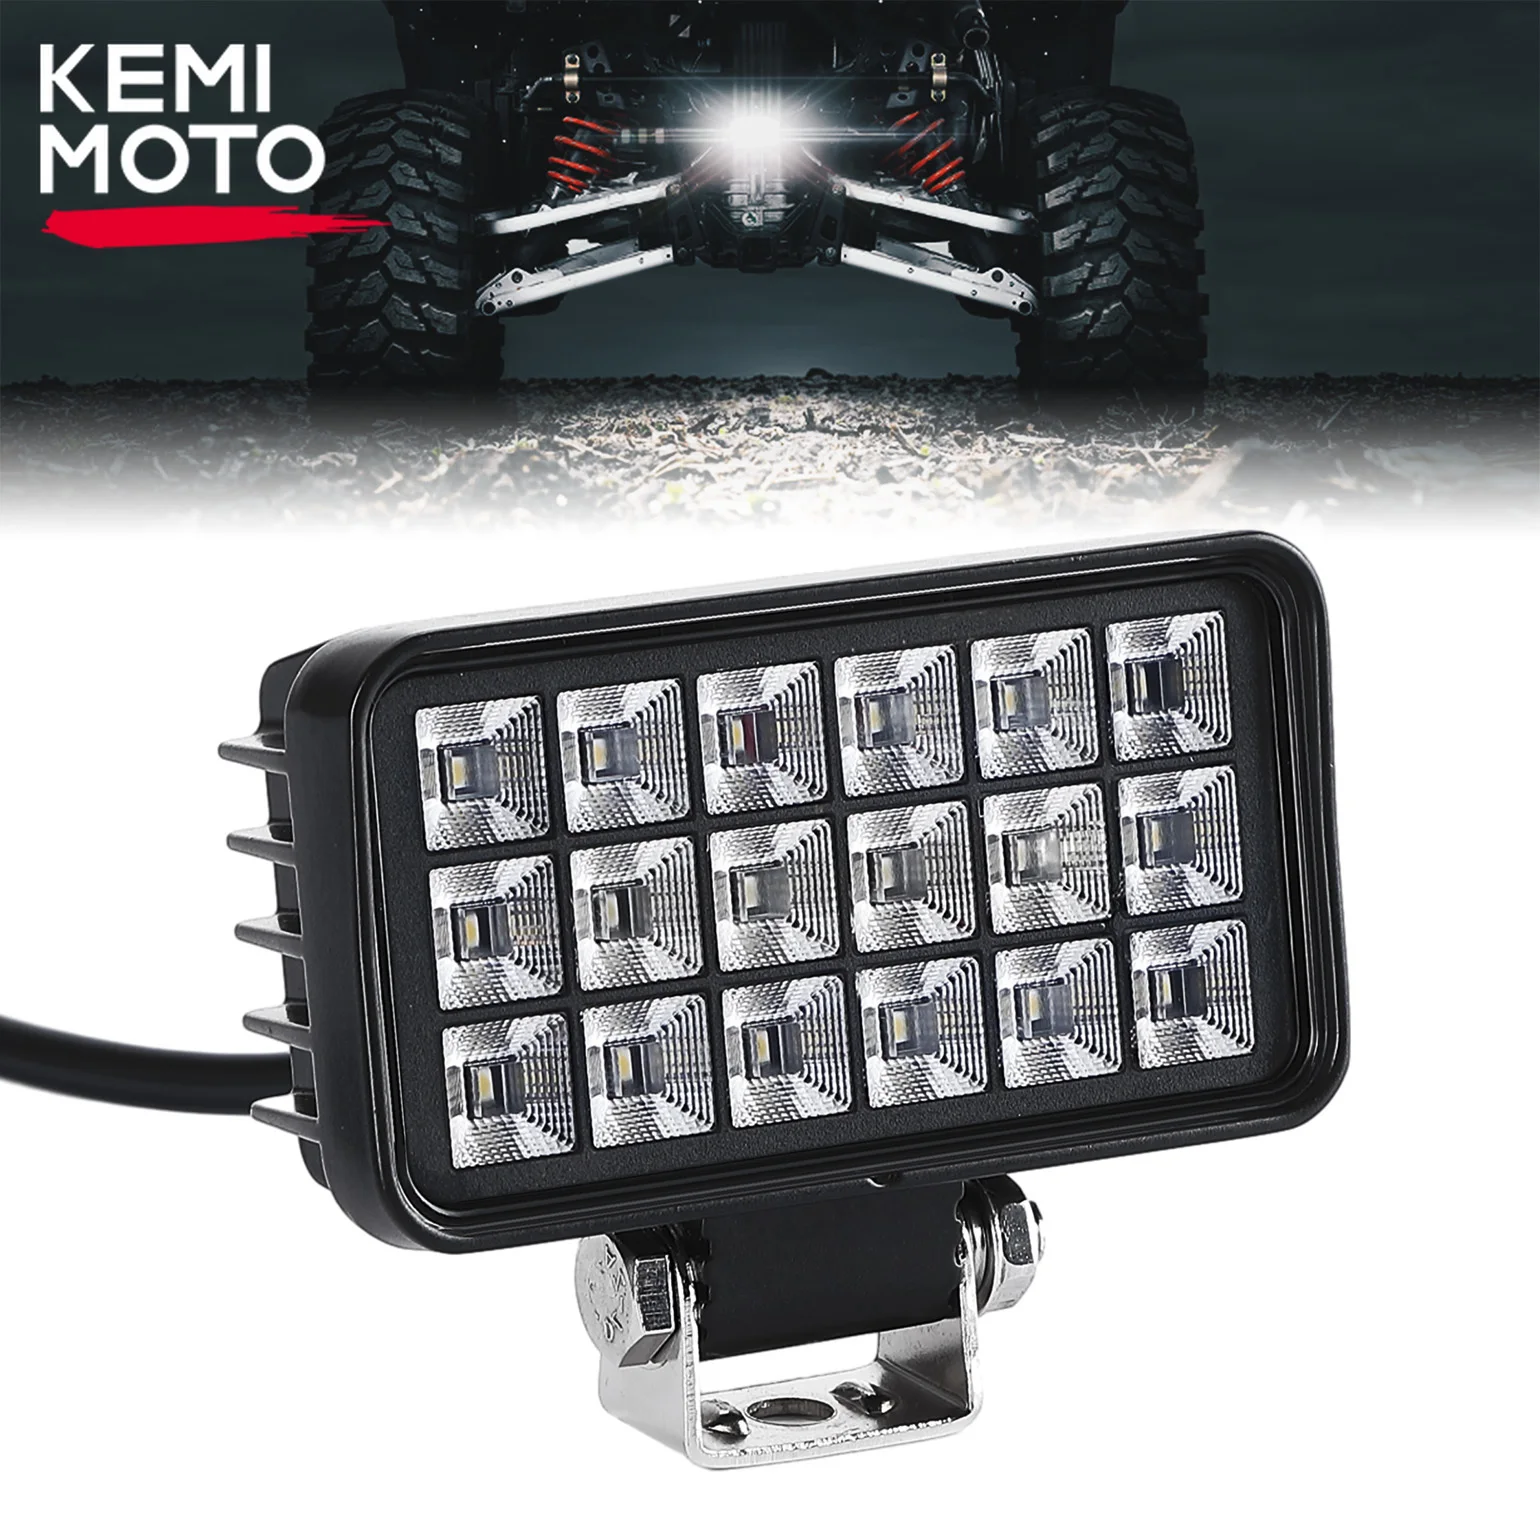 KEMIMOTO 36W Reverse Rear LED Light Kit Compatible with Polaris Ranger 1000 XP/ 1000 XP Crew 2018-2024 Backup Light with Switch 84092887 rear view camera reverse camera parking assist backup camera for cadillac xt5 2017 2018 2019